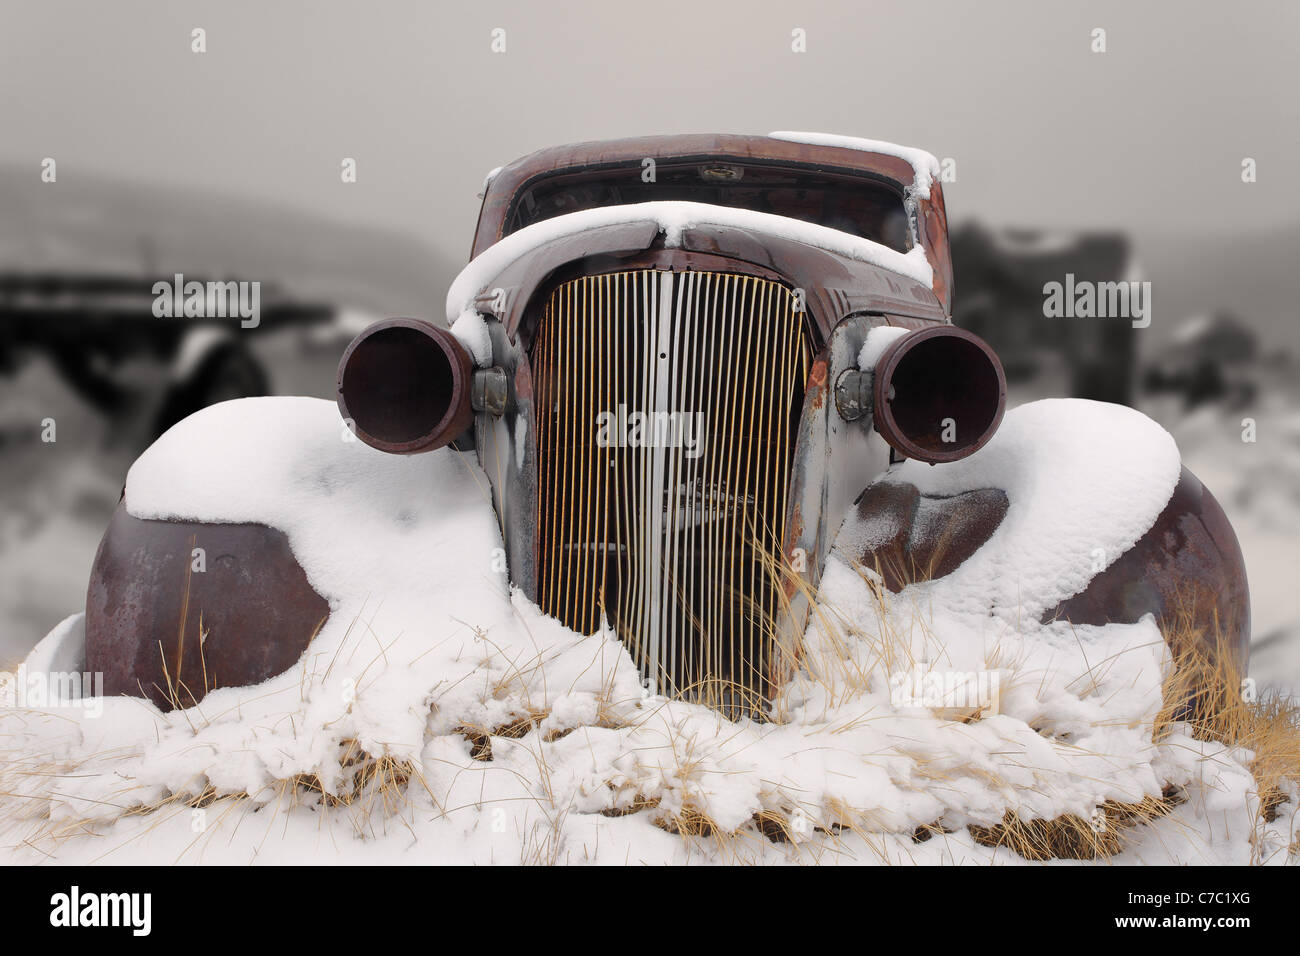 1937 vintage Chevrolet master deluxe coupe covered in snow, Bodie State Historic Park, California, USA Stock Photo